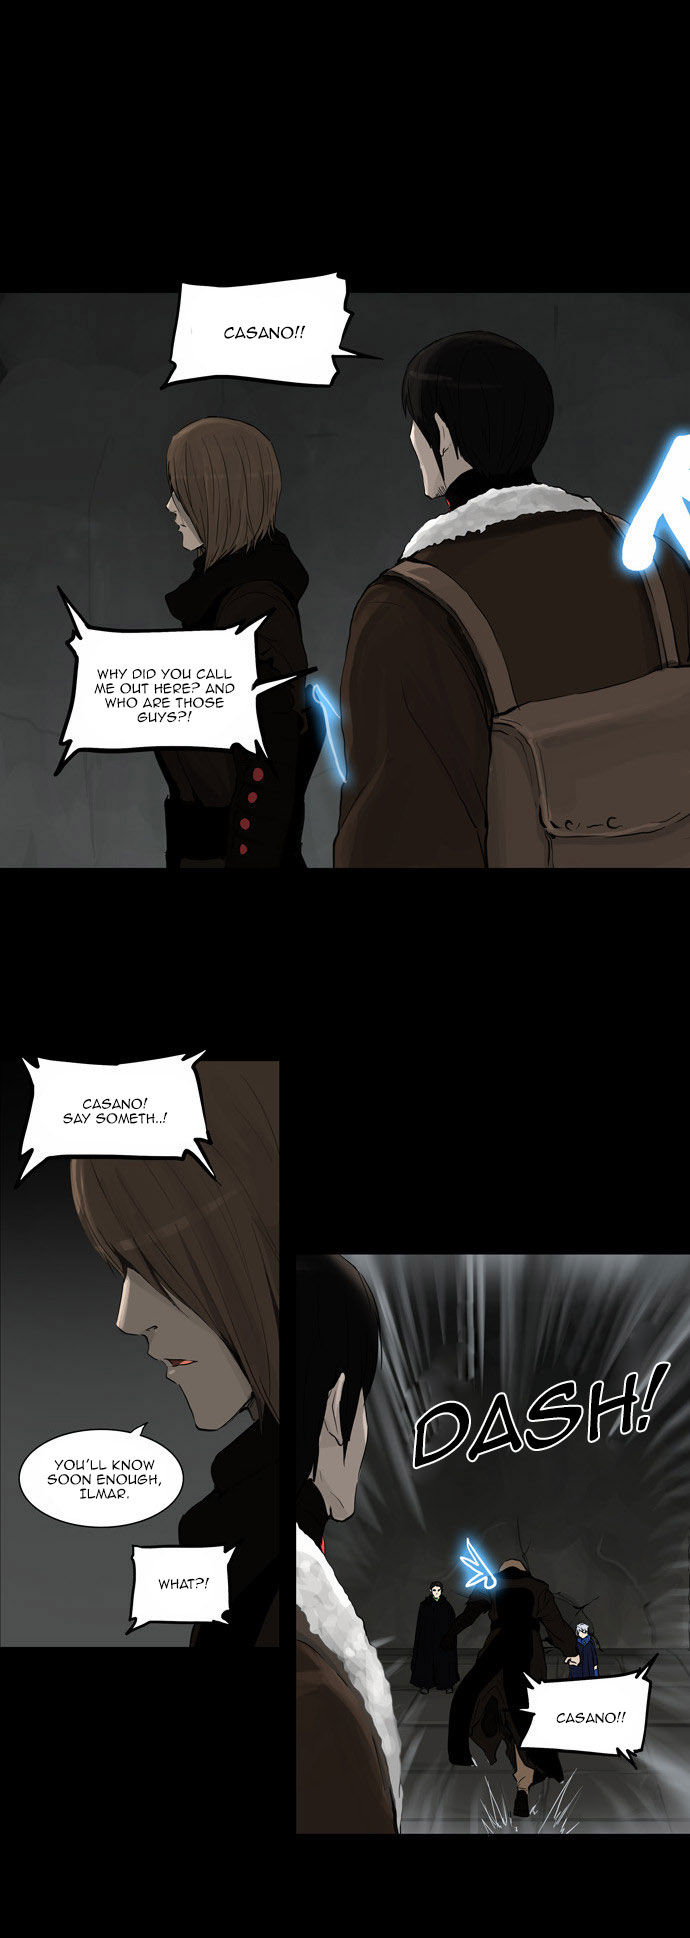 Tower of God 127